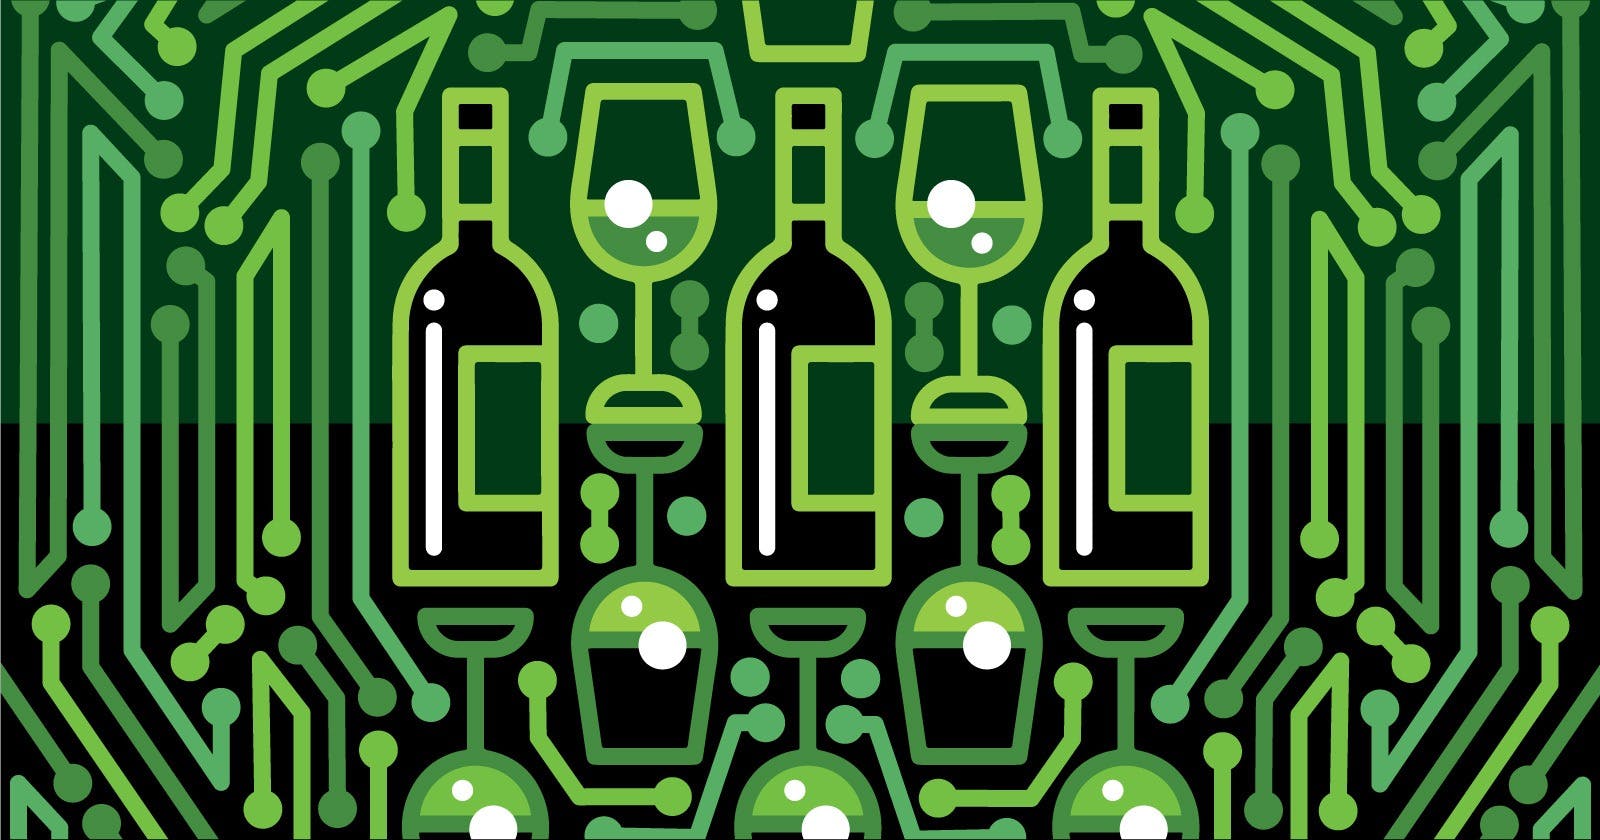 Create a Wine Recommender
Using NLP on AWS